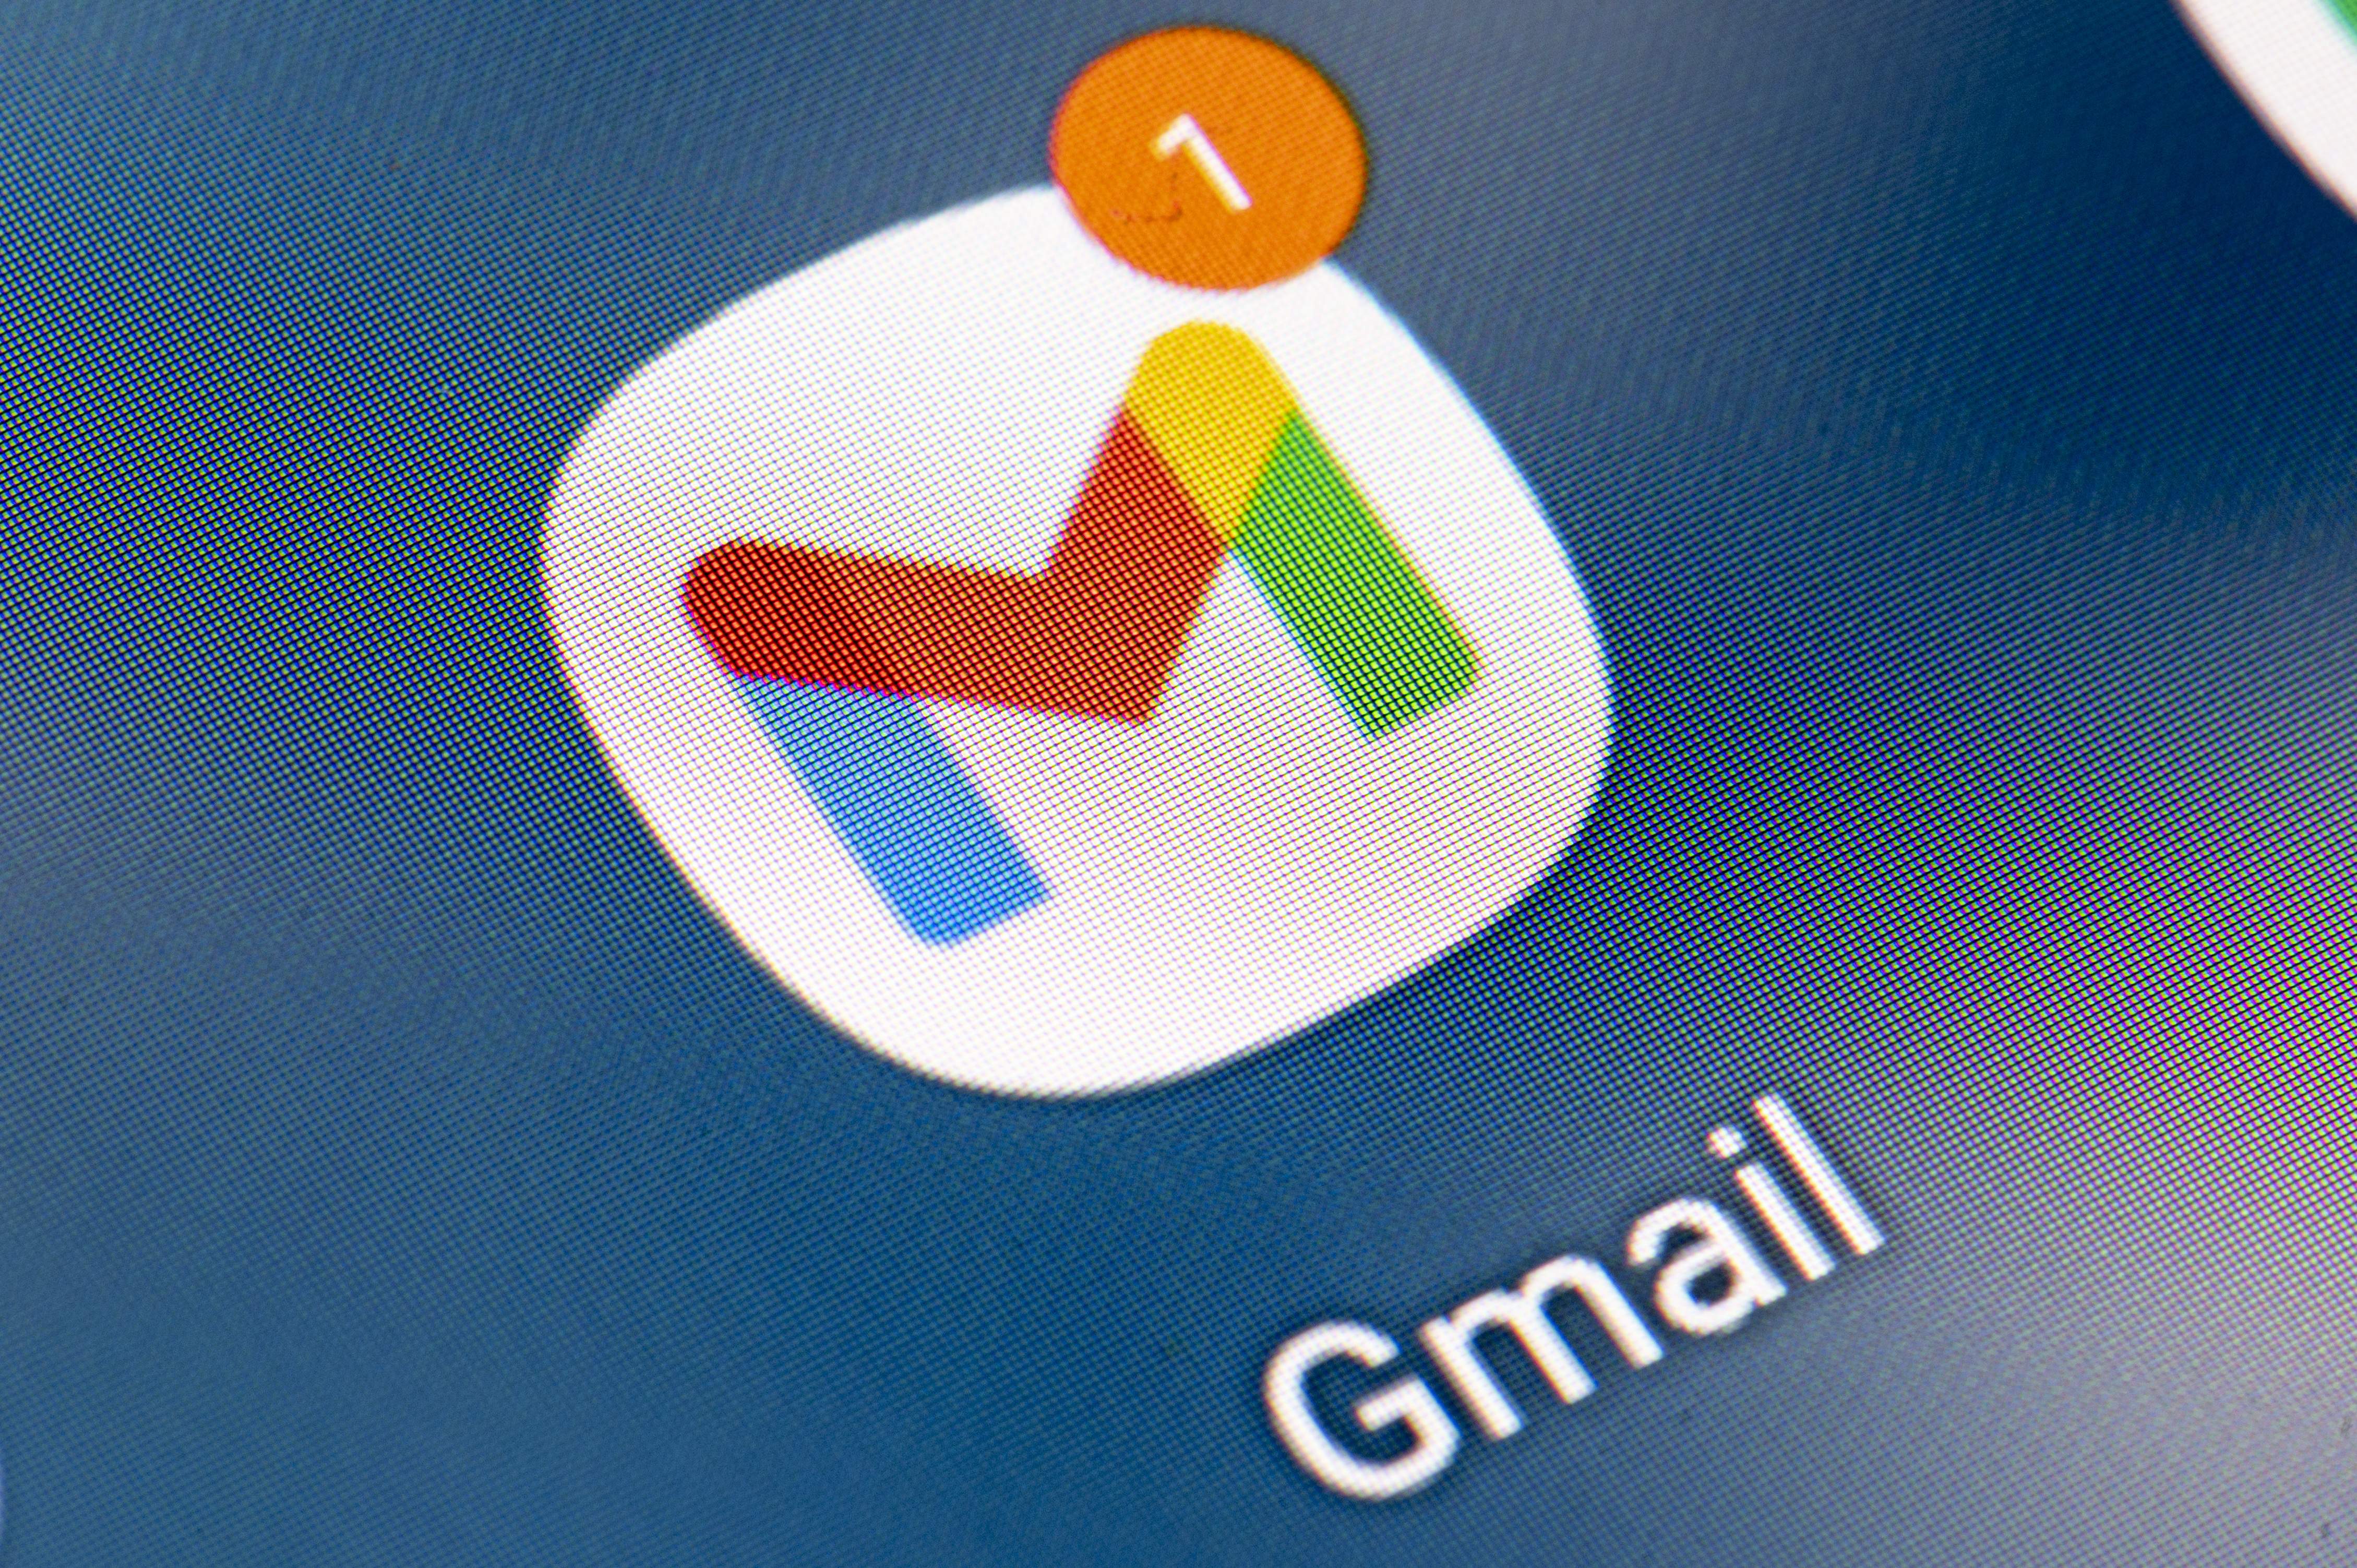 EuropaPress 5591195 filed 21 january 2022 berlin the icon of the gmail app can be seen on the